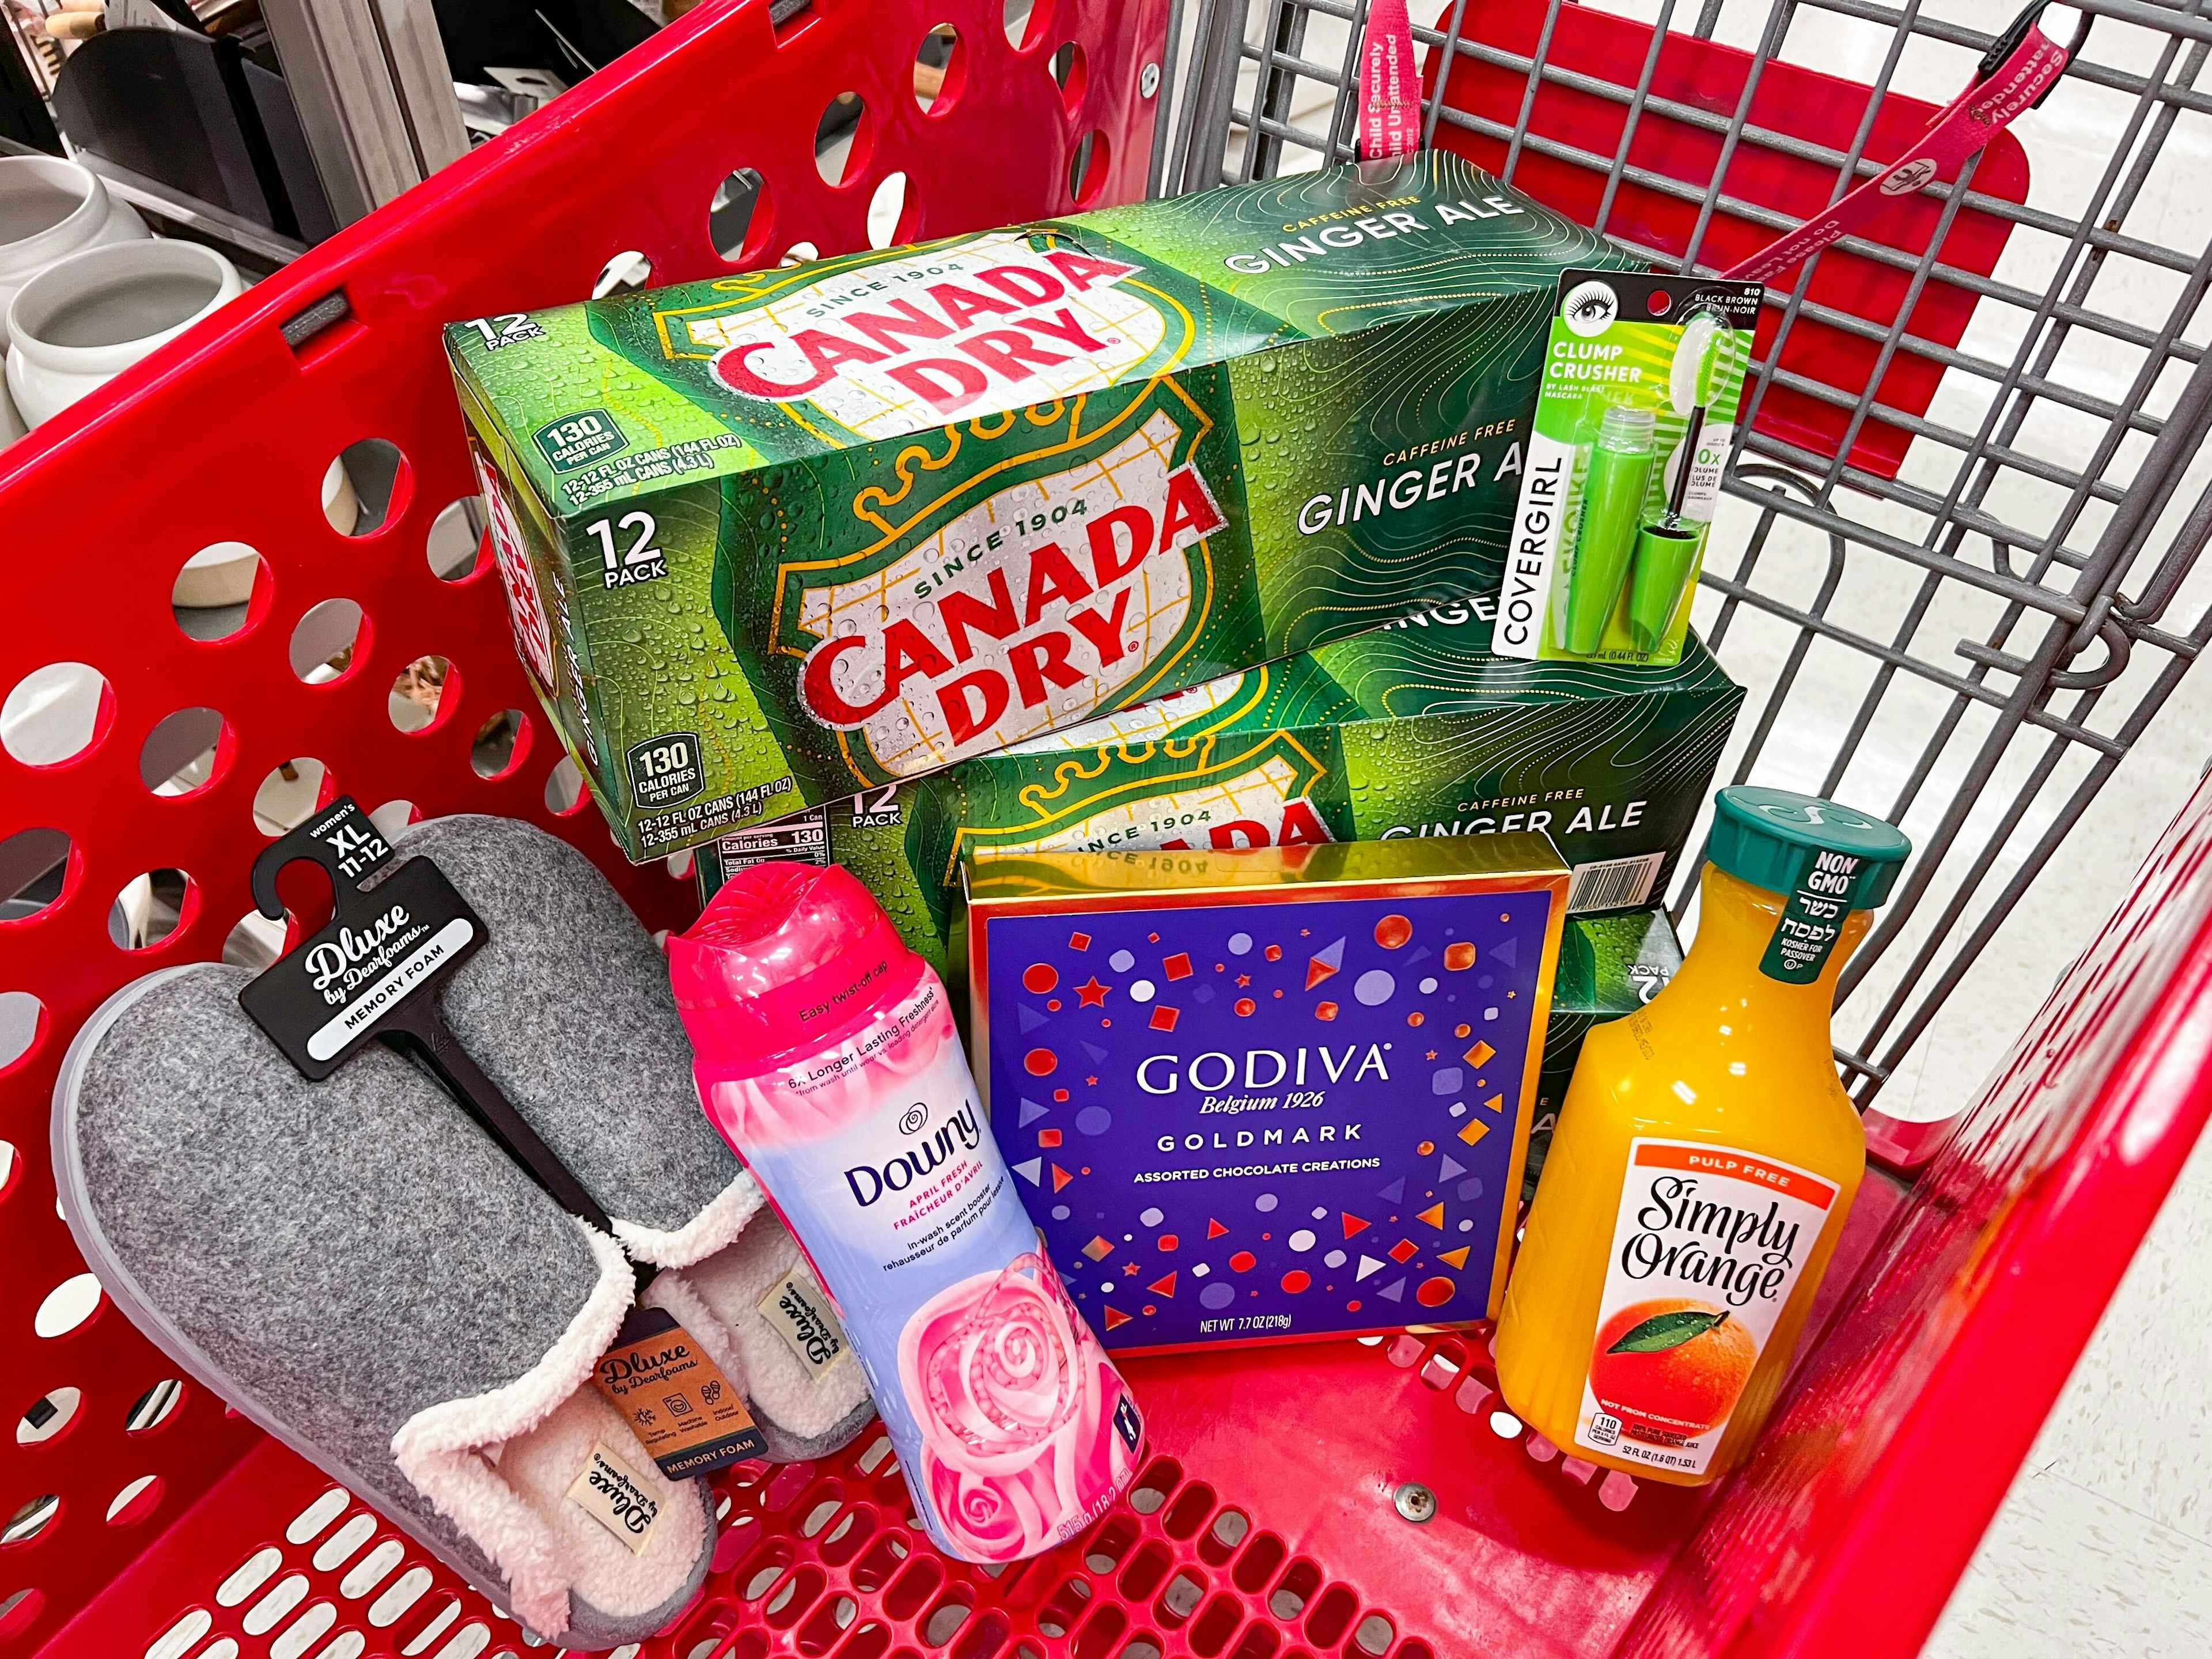 canada dry downy slippers godiva simply orange covergirl in target cart